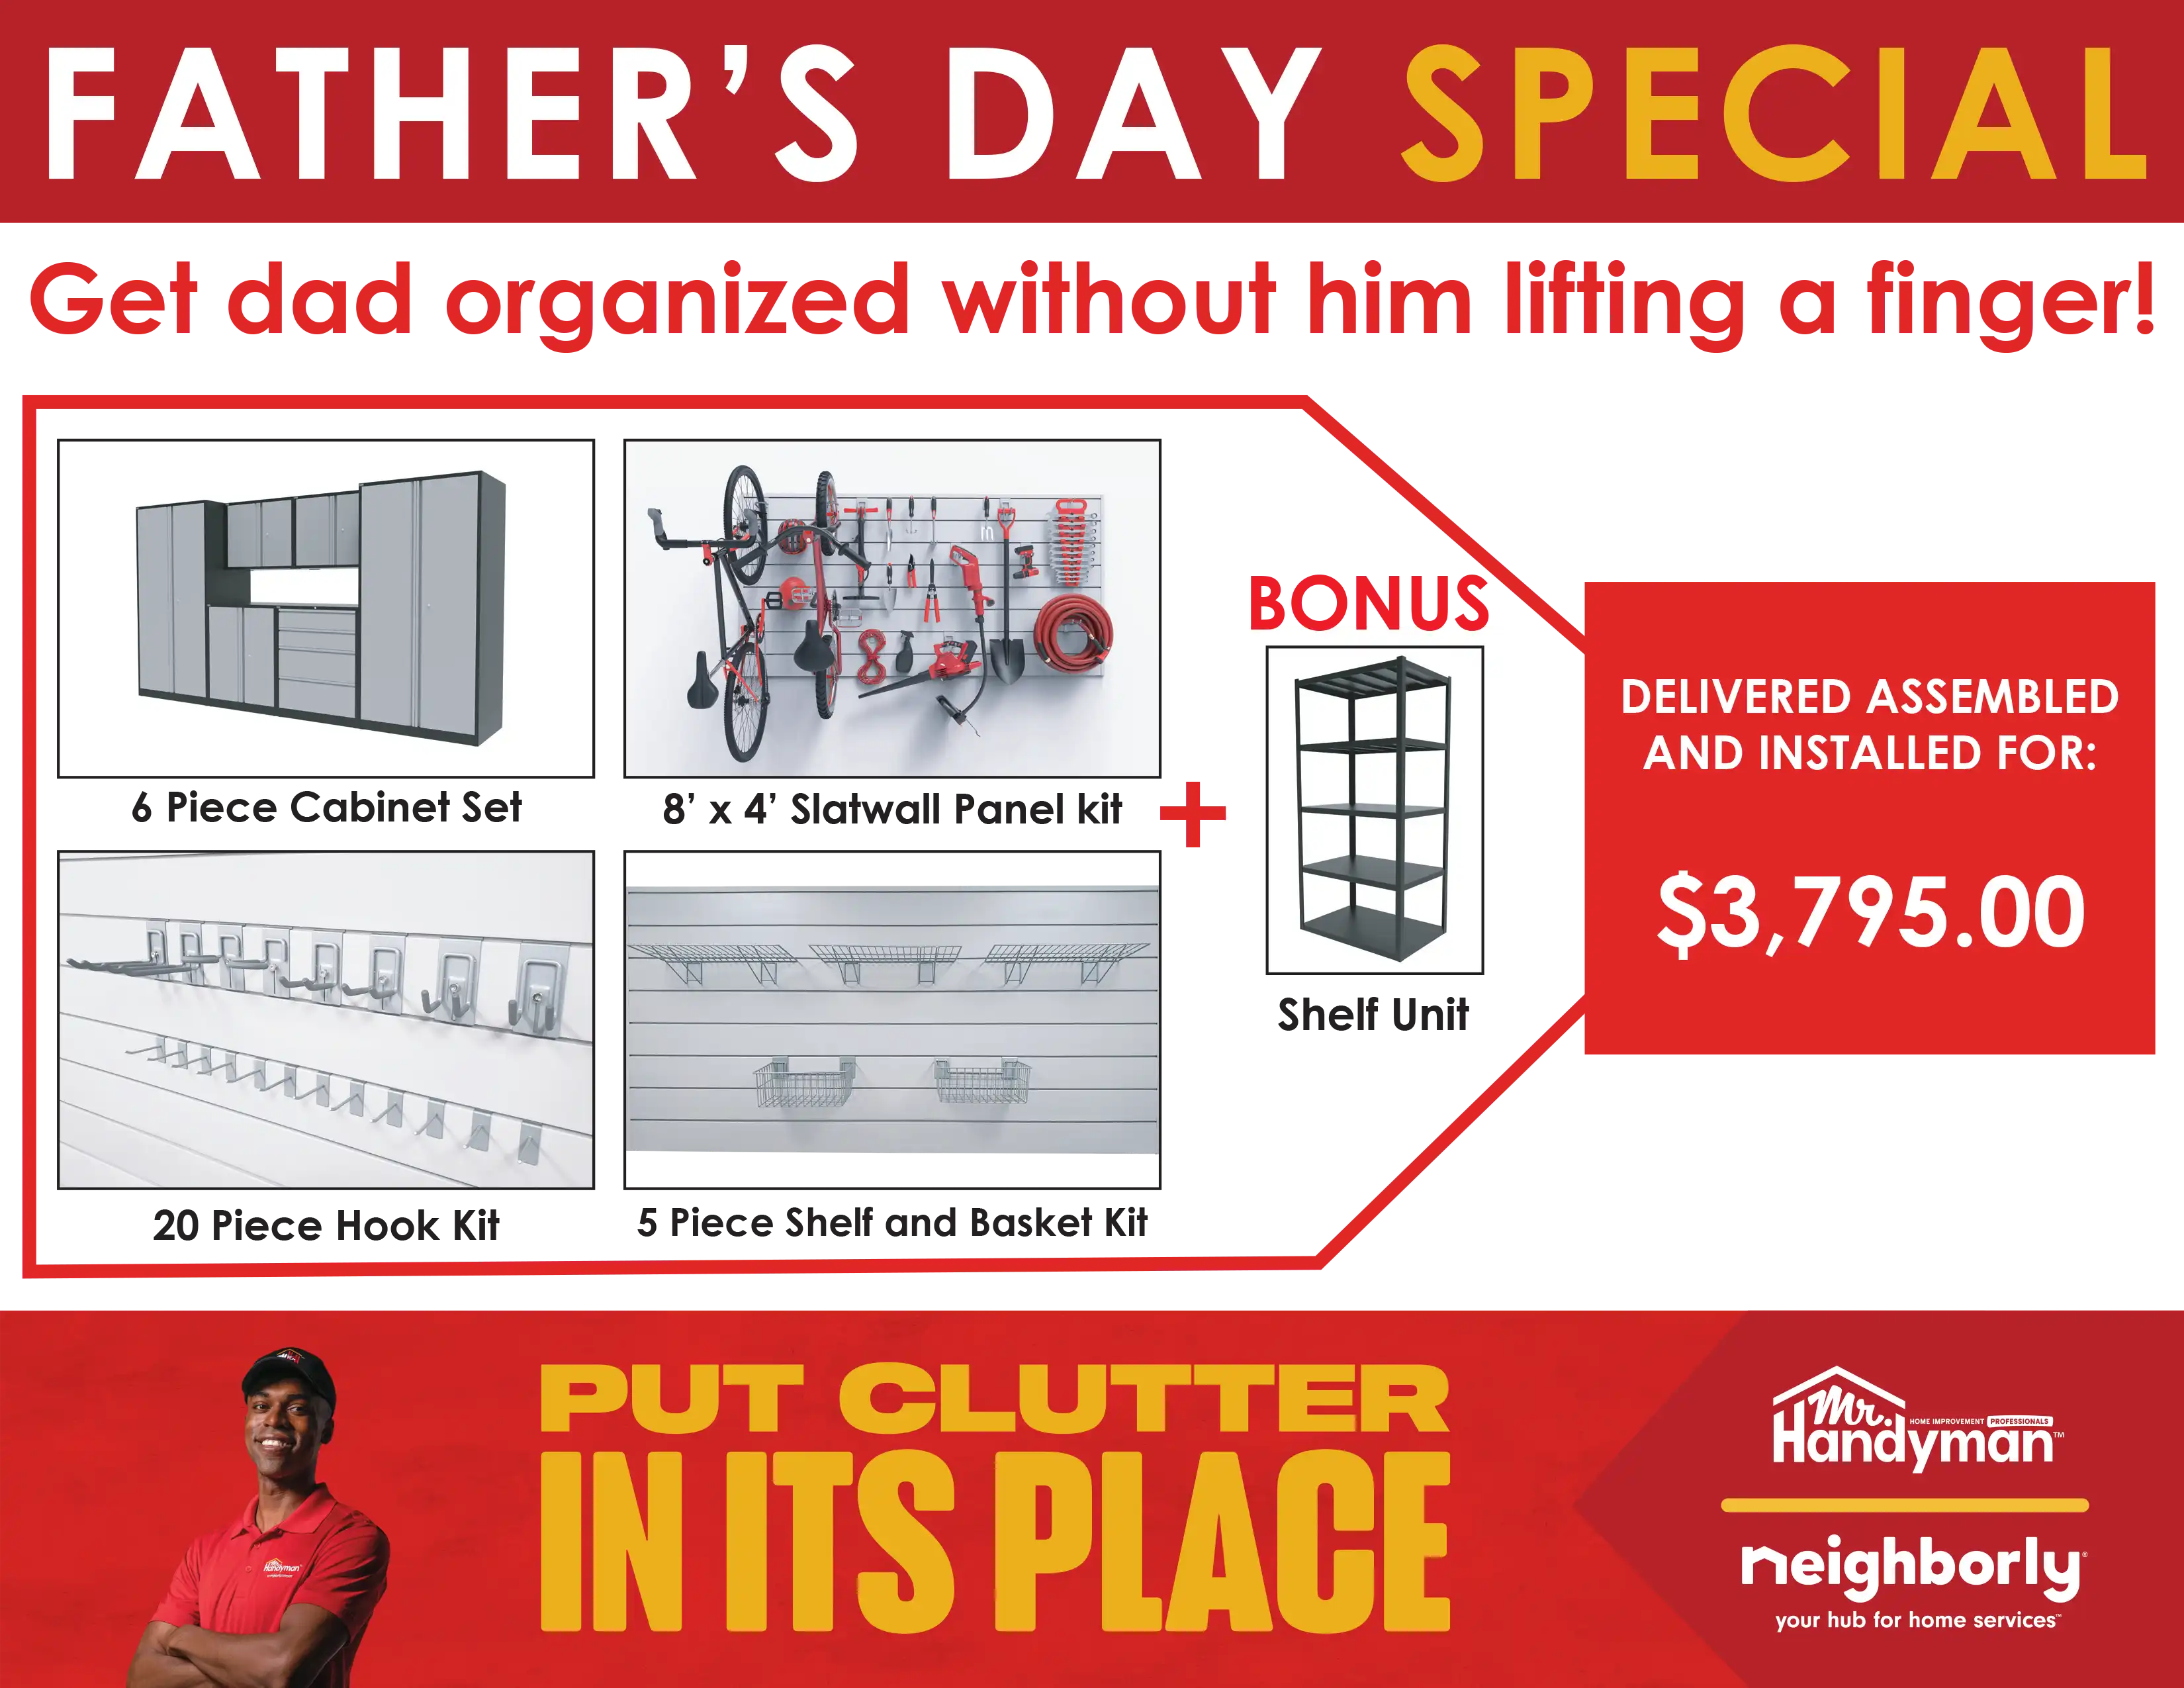 Father's Day Special offered by Mr. Handyman serving Naples, Marco Island and Immokalee